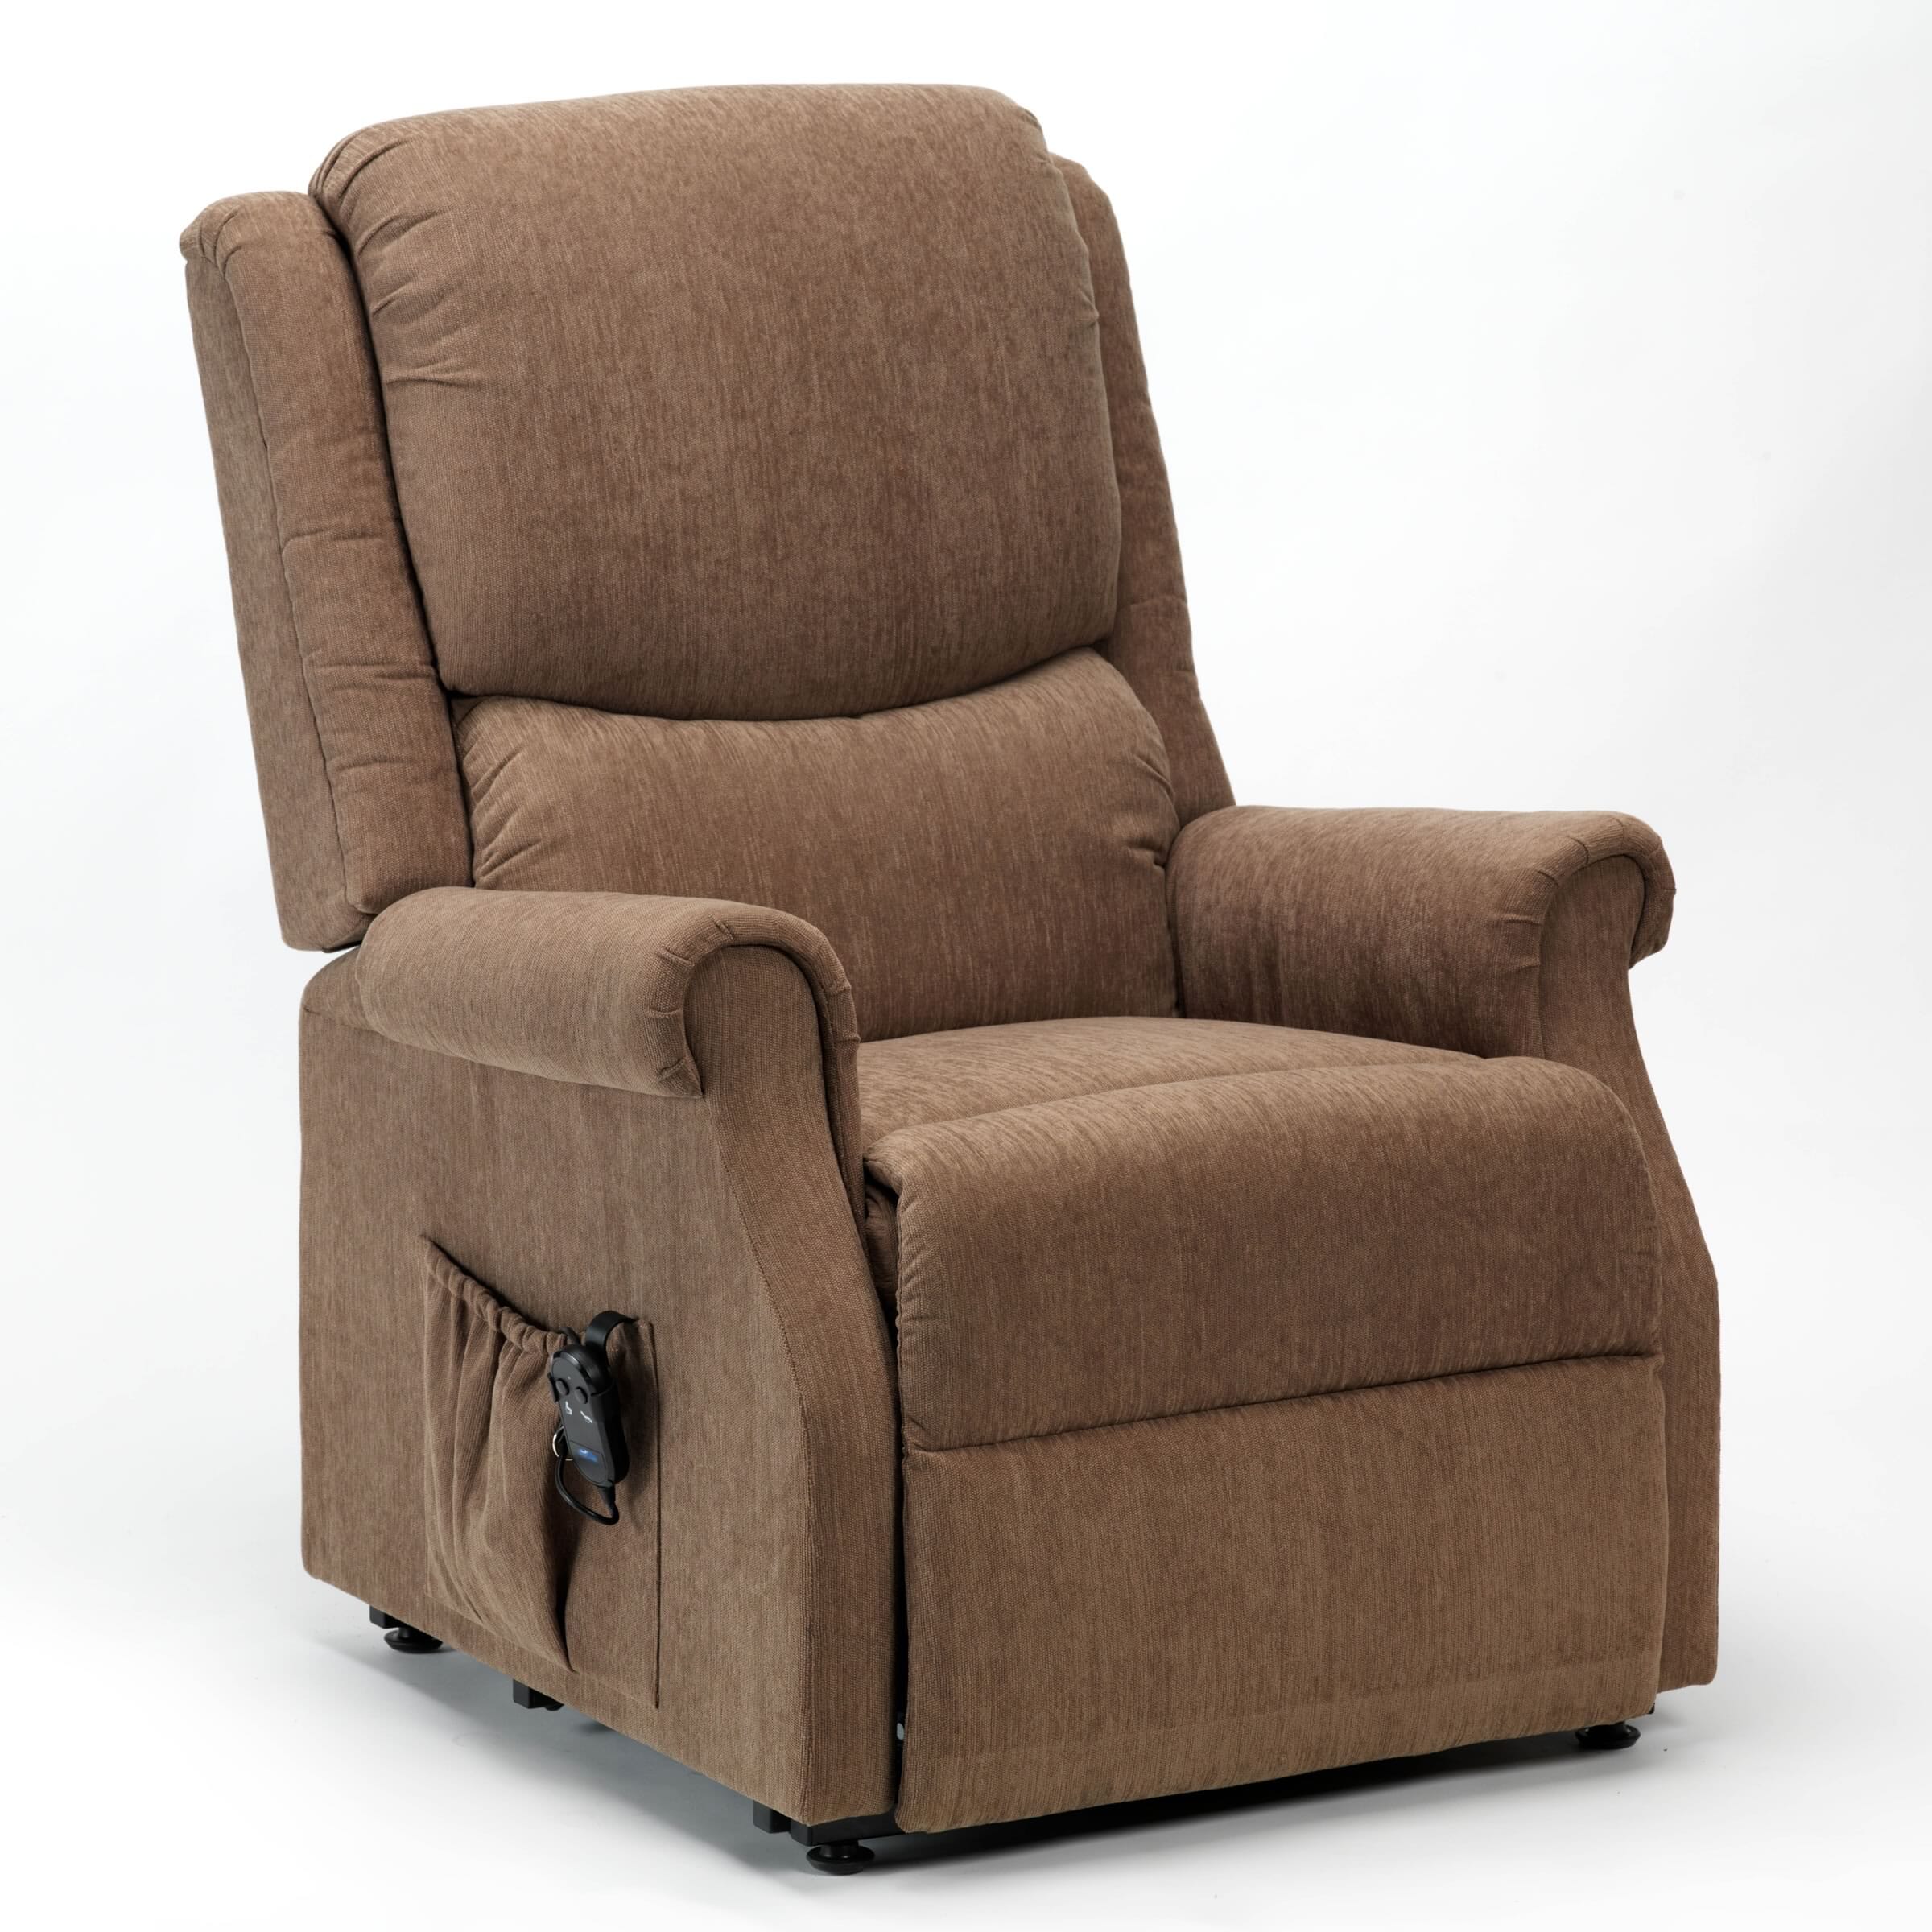 View Indiana Rise and Recline Chair Standard Mushroom information